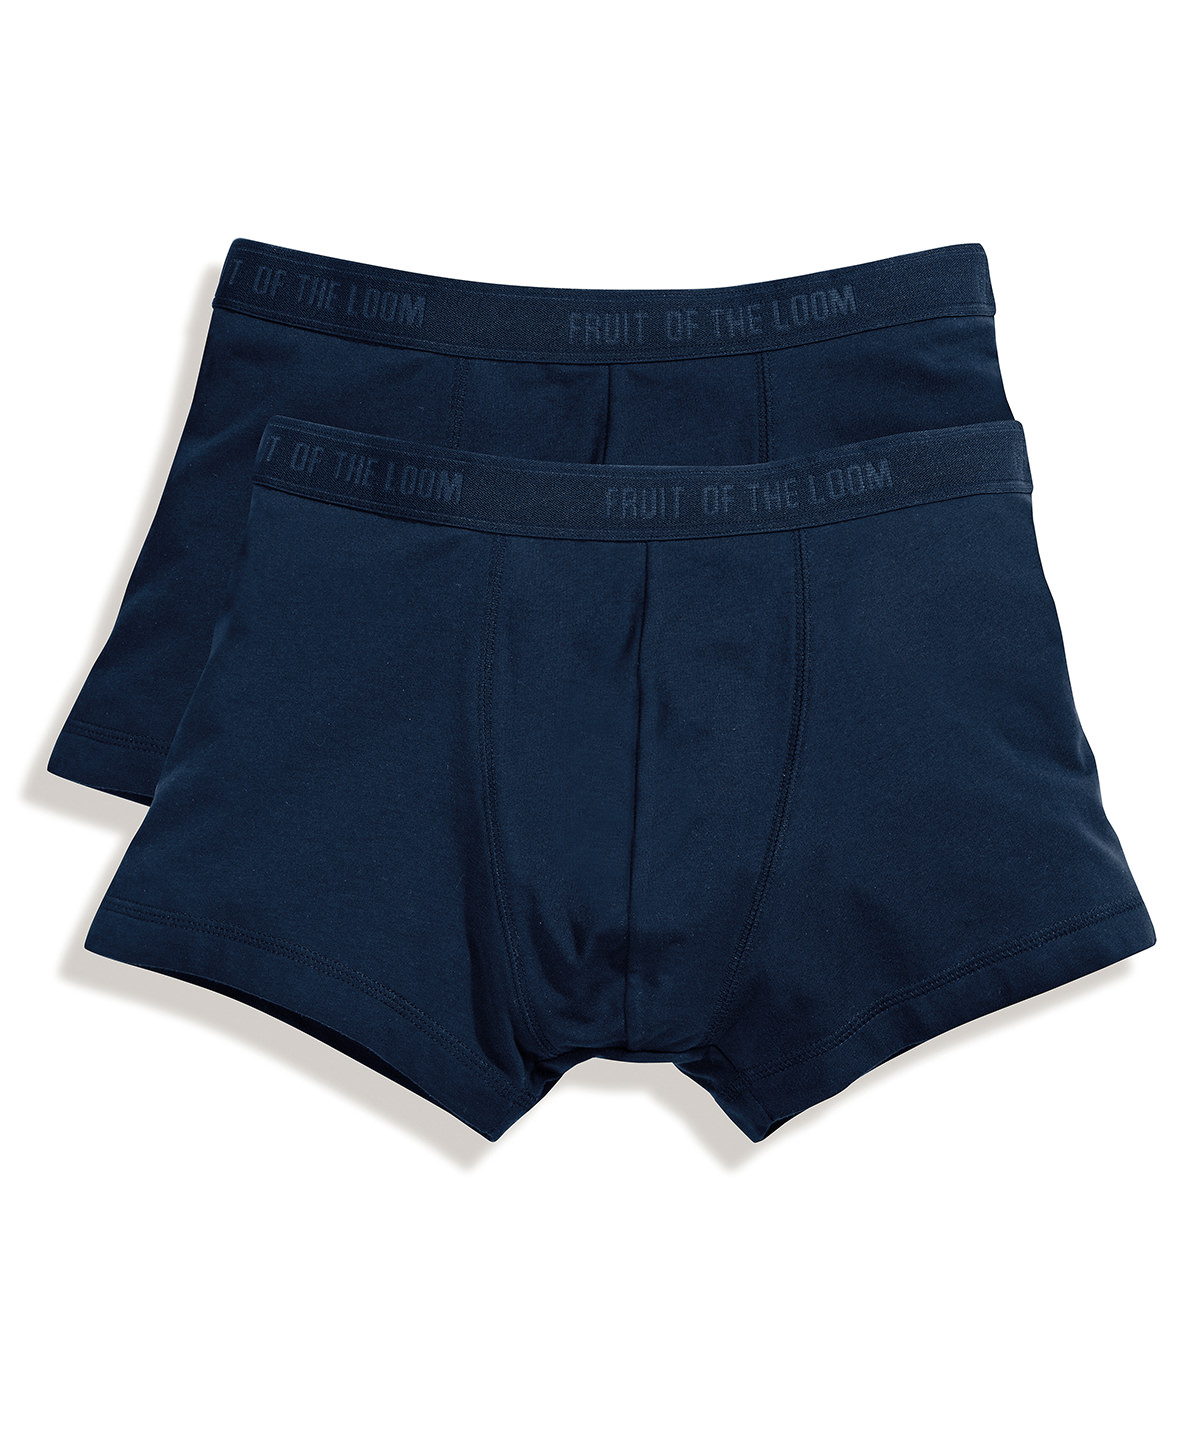 Classic Shorty 2-Pack UnderwearNavy Size Small